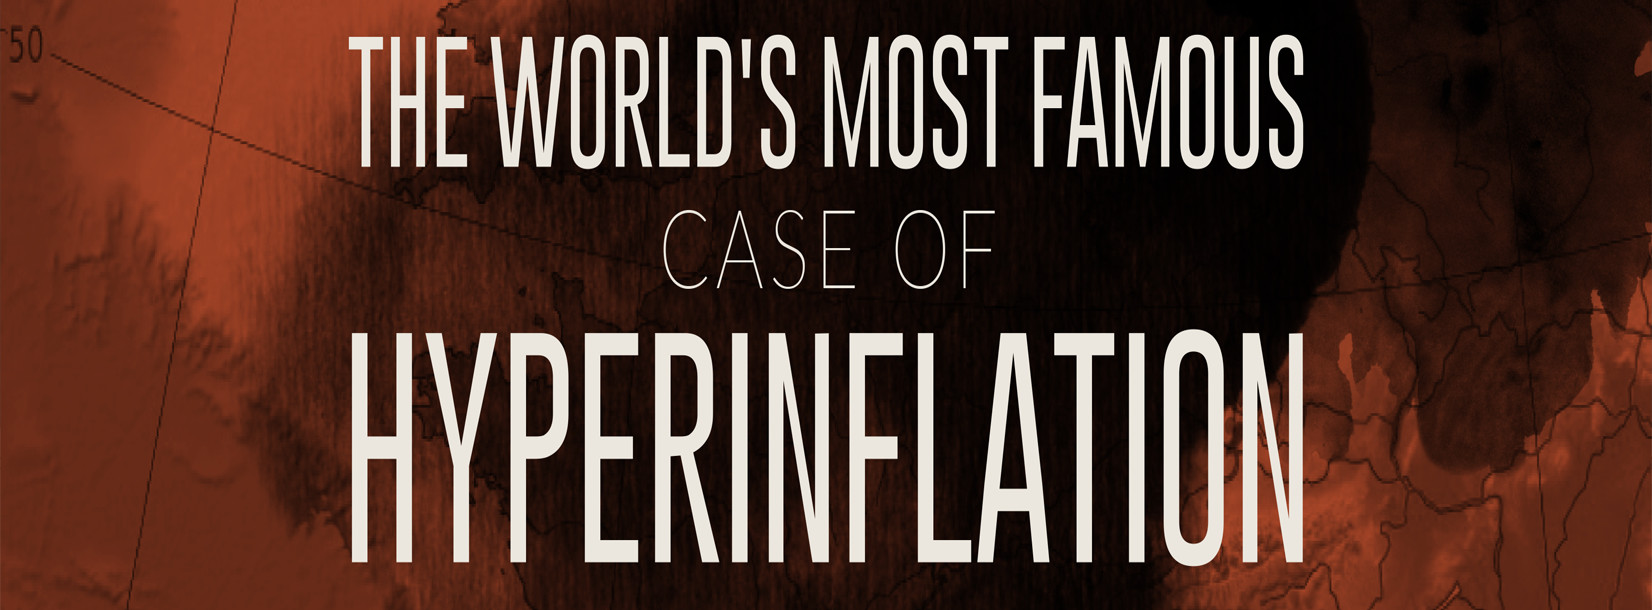 The World’s Most Famous Case of Hyperinflation Pt. 1 (Infographic)